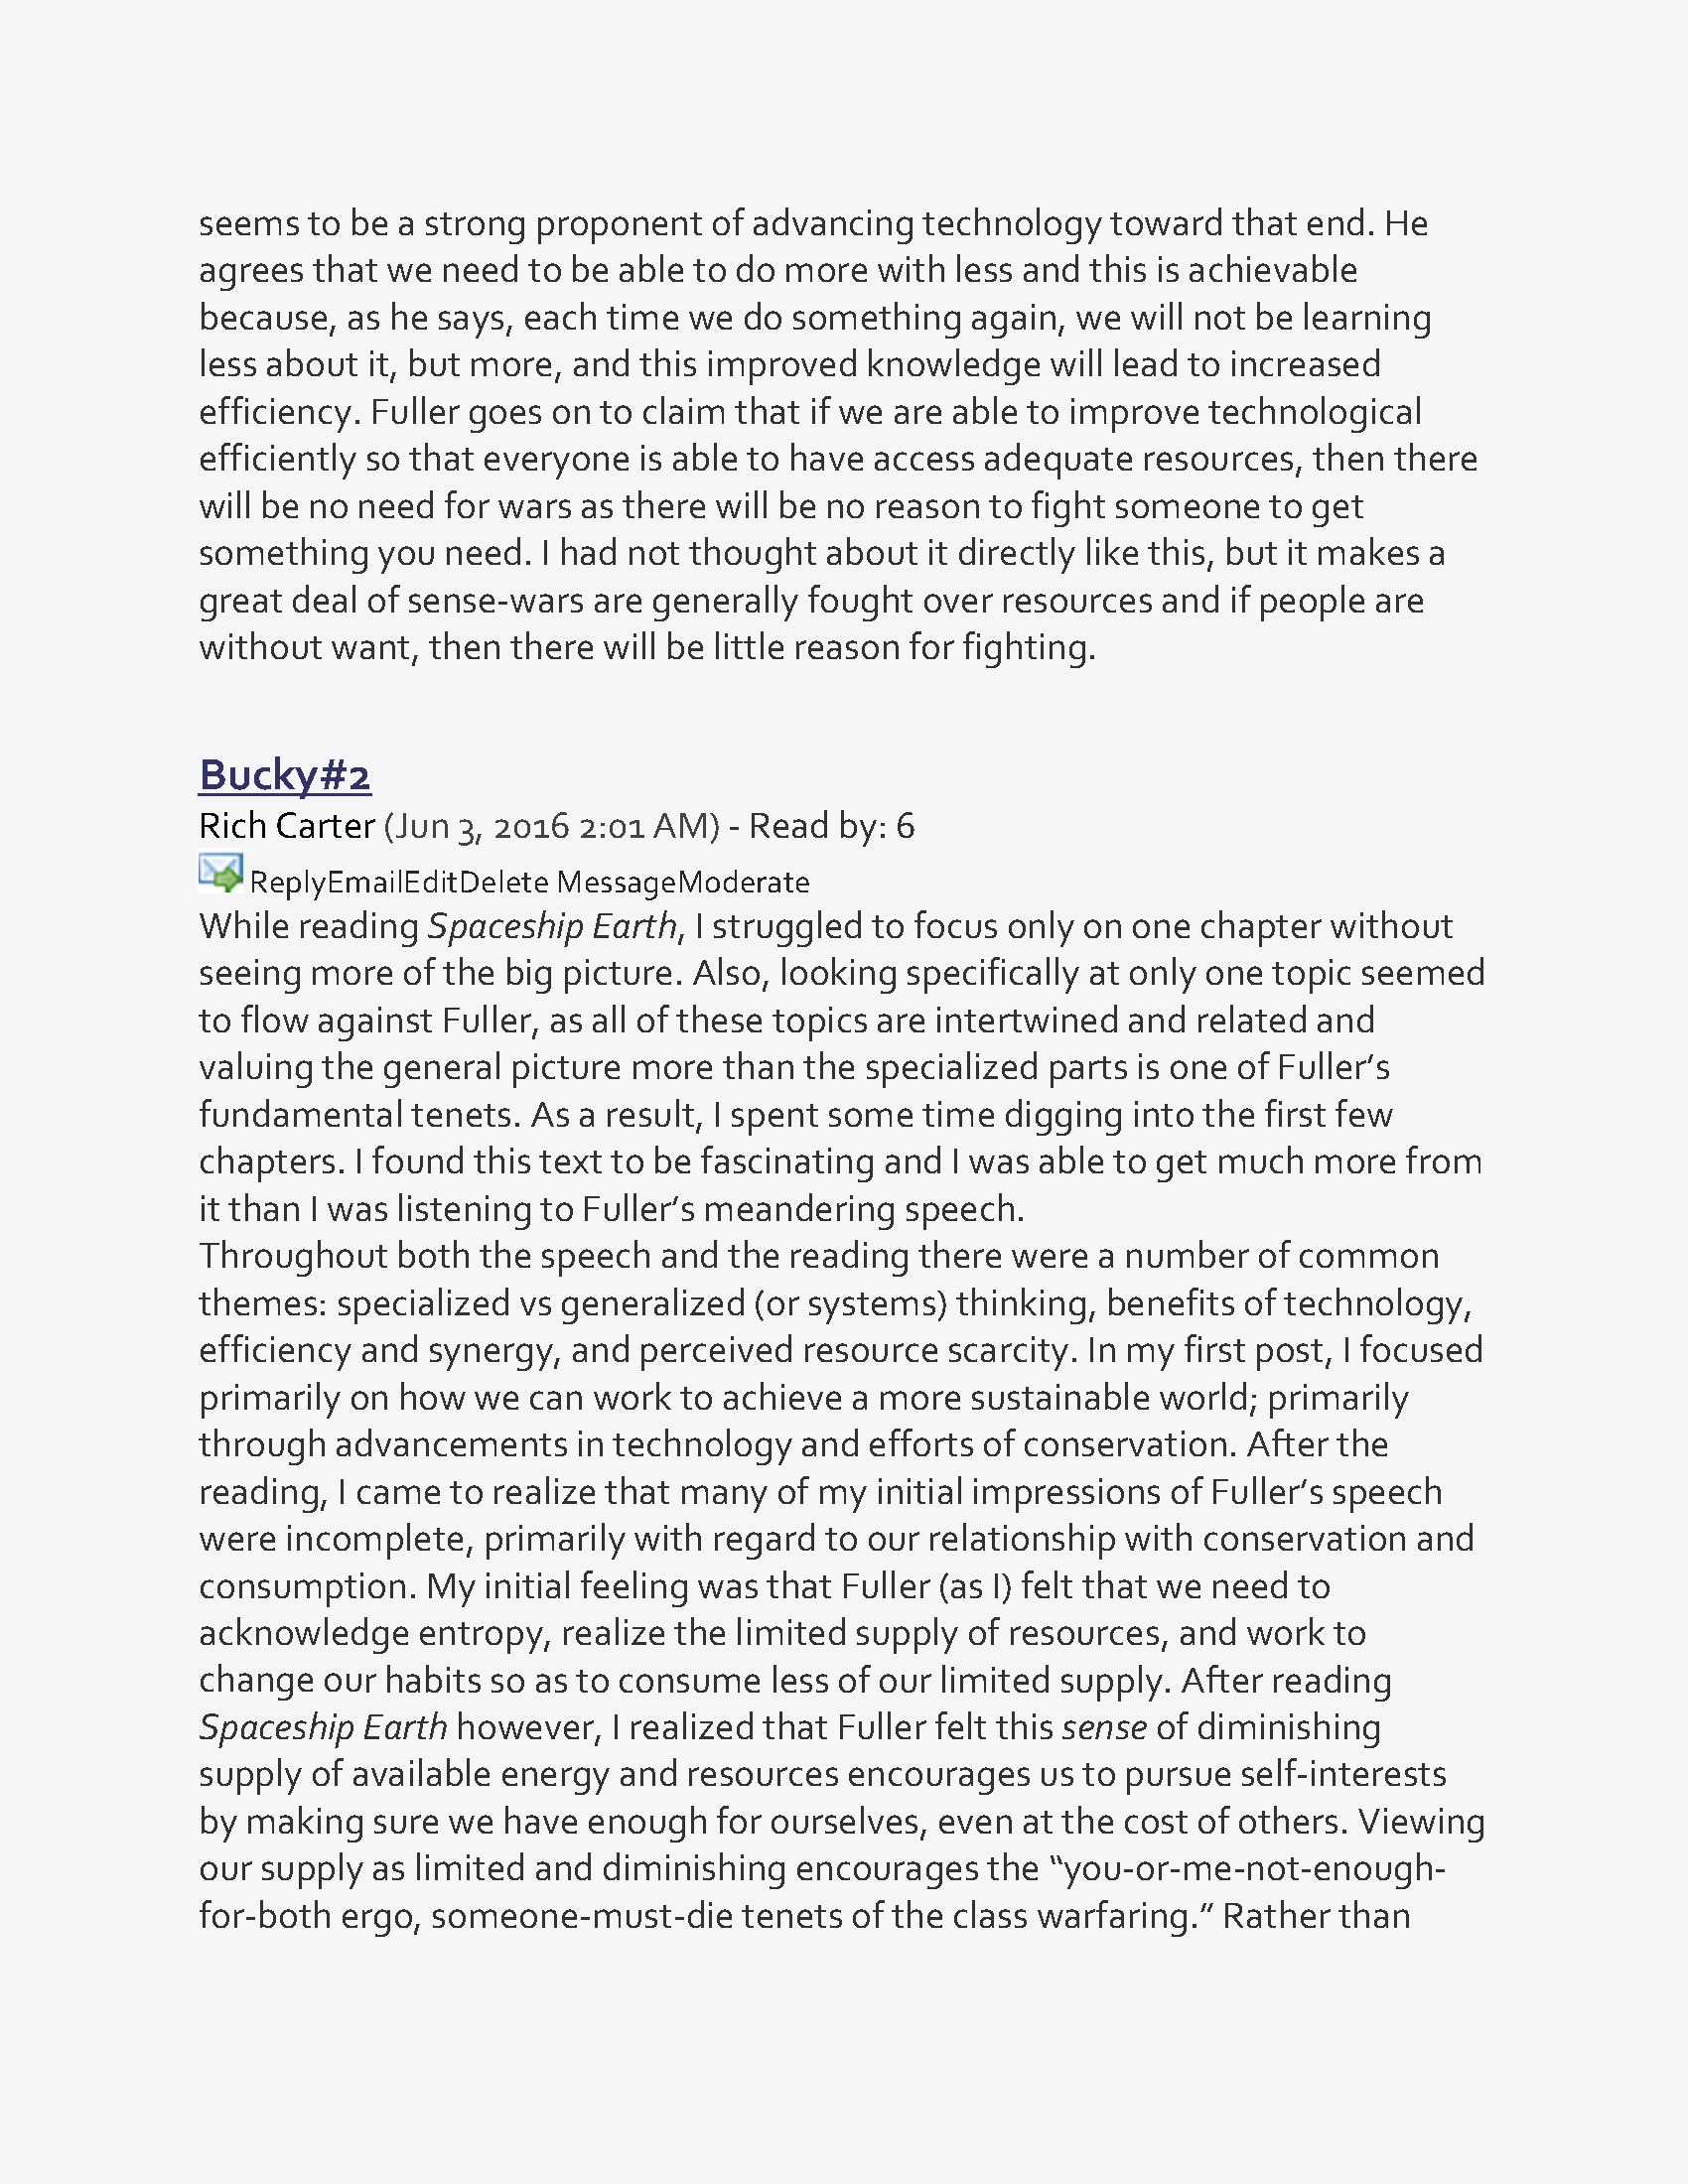 Koh, Ming Wei --Exemplar - A Fuller View - Systemic View of the World_Page_10.png